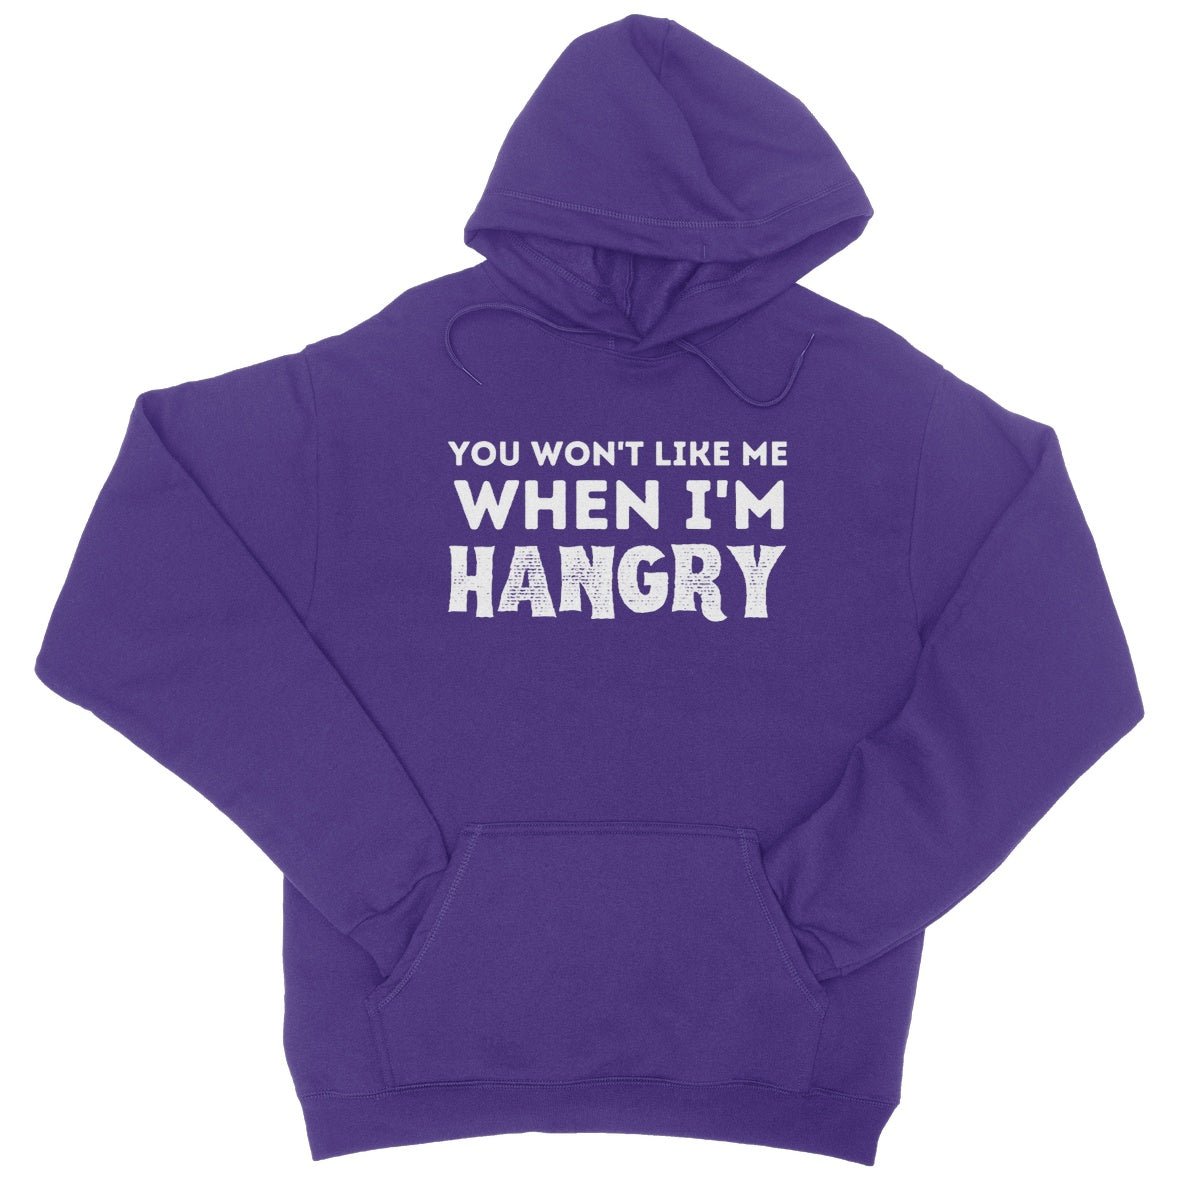 you will not like me when I am hangry hoodie purple